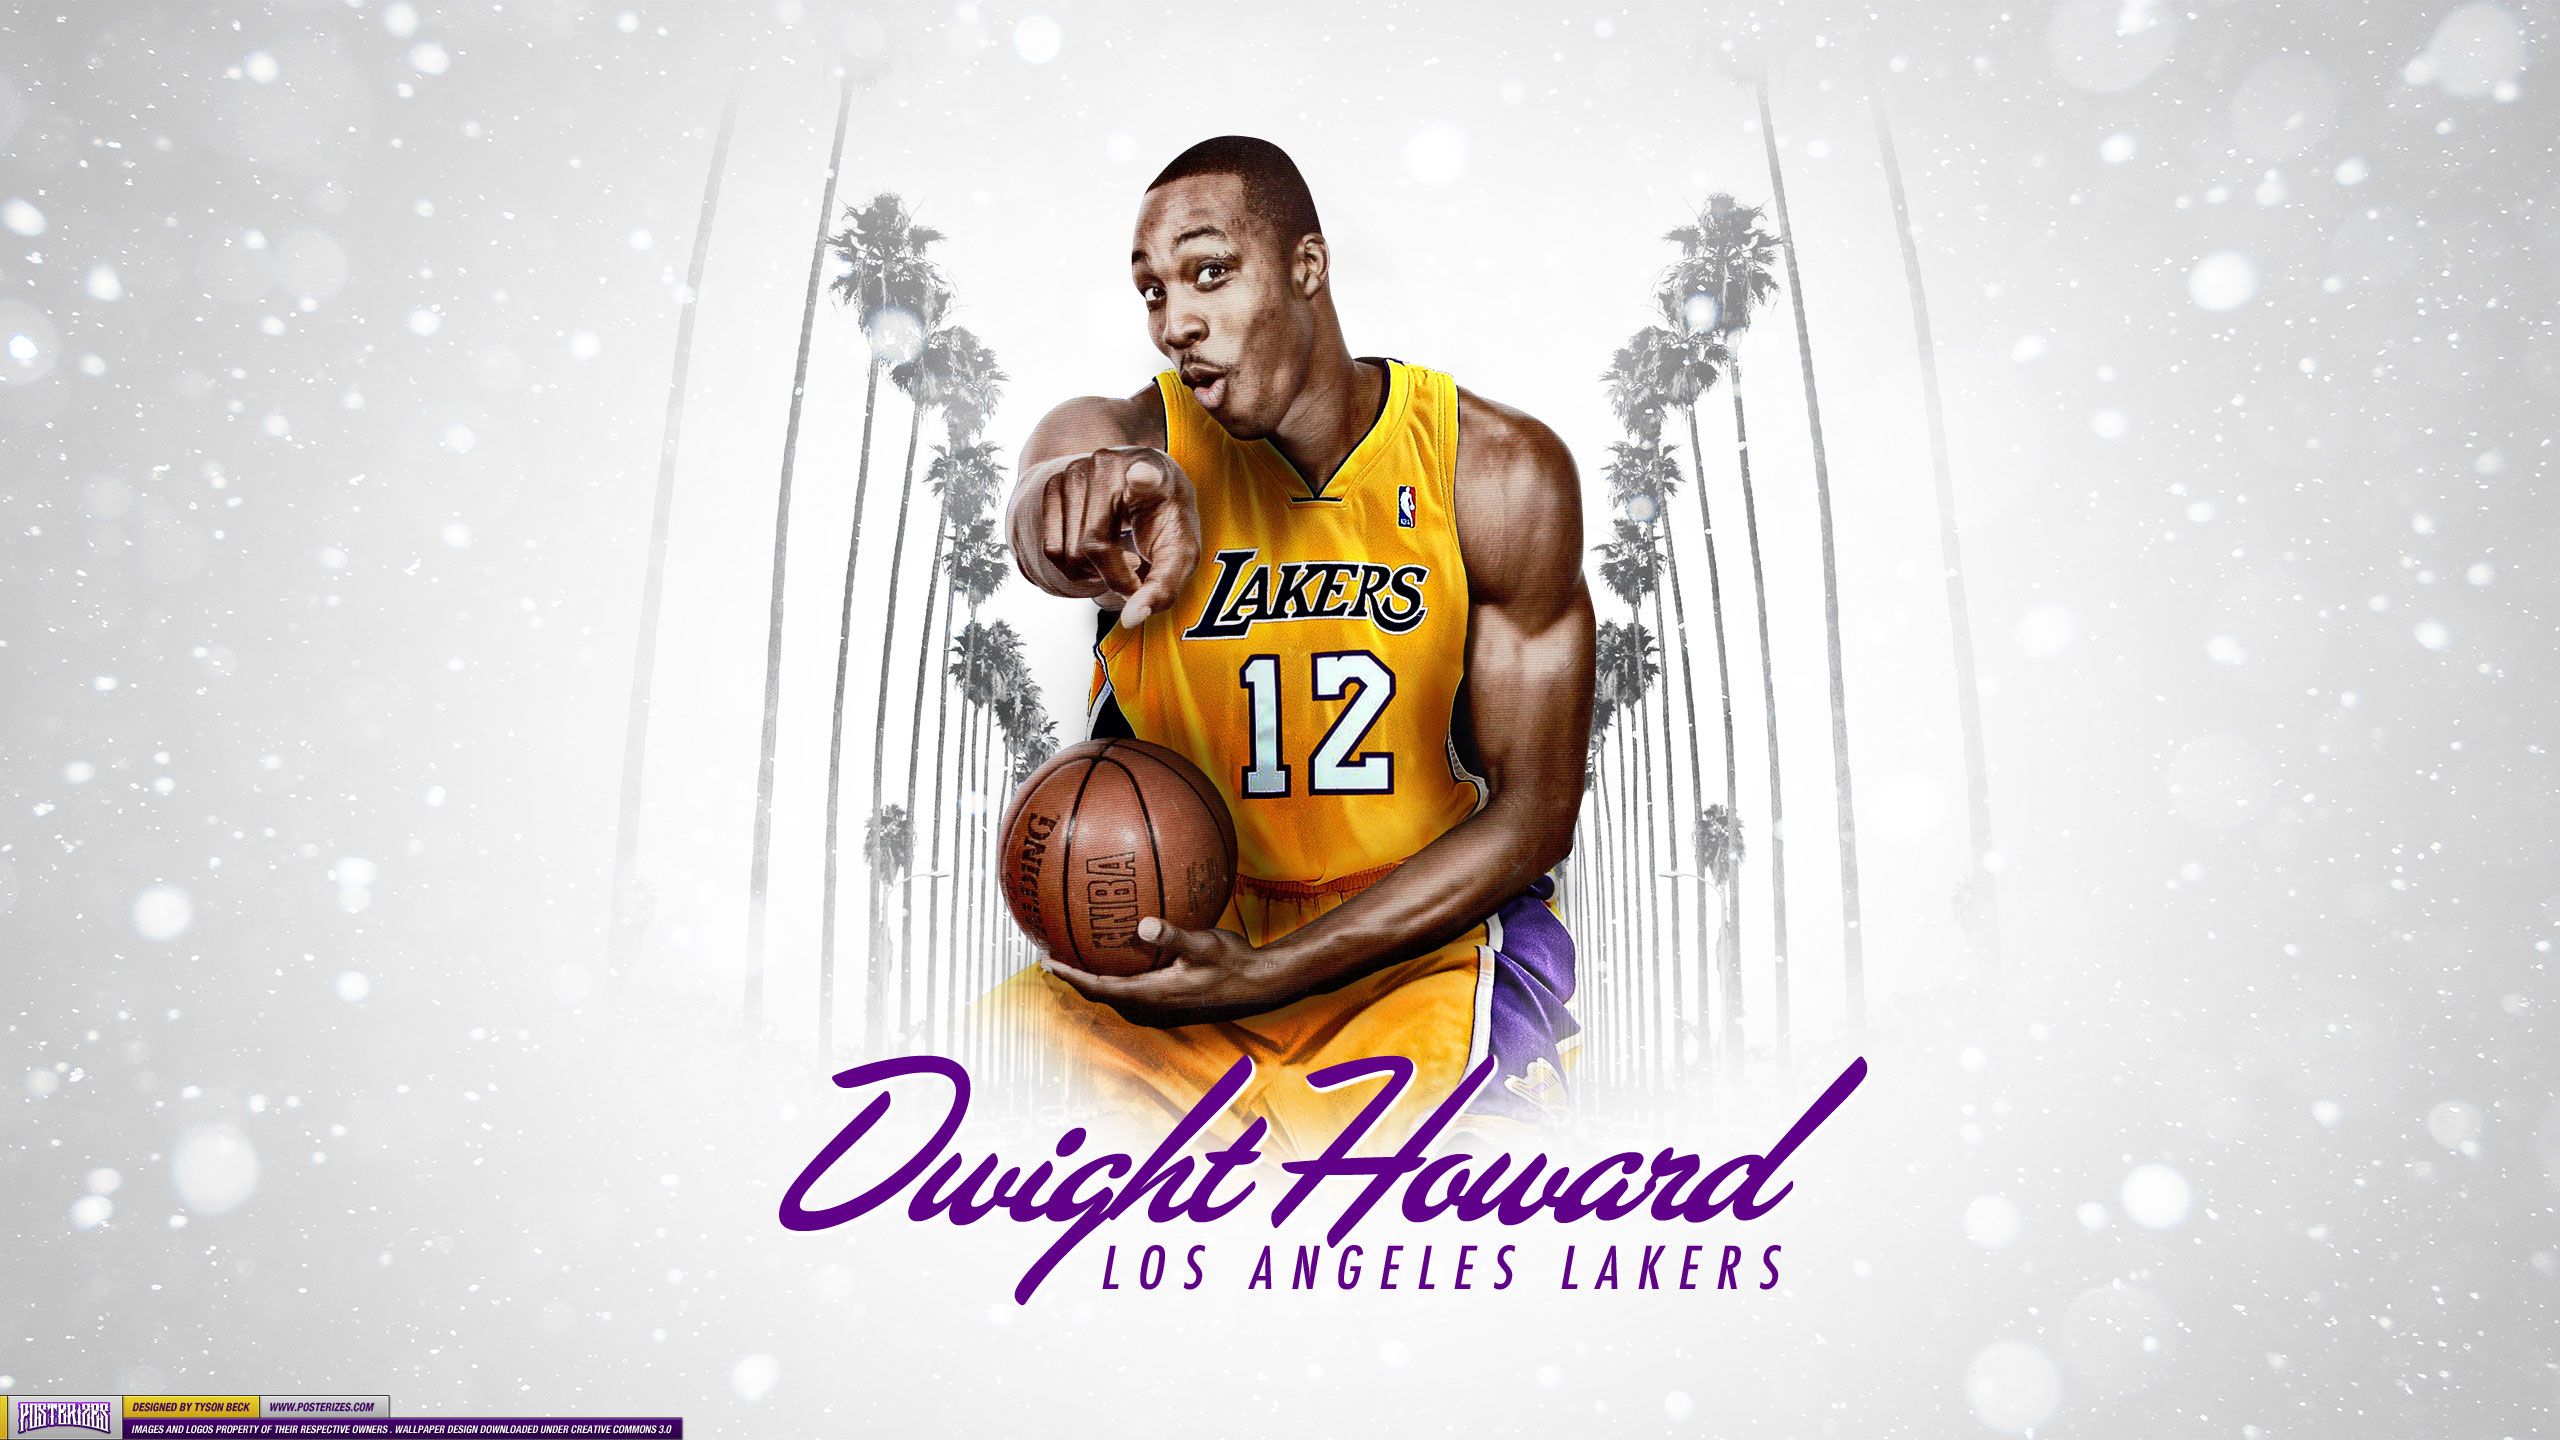 Lakers 4K wallpaper for your desktop or mobile screen free and easy to download